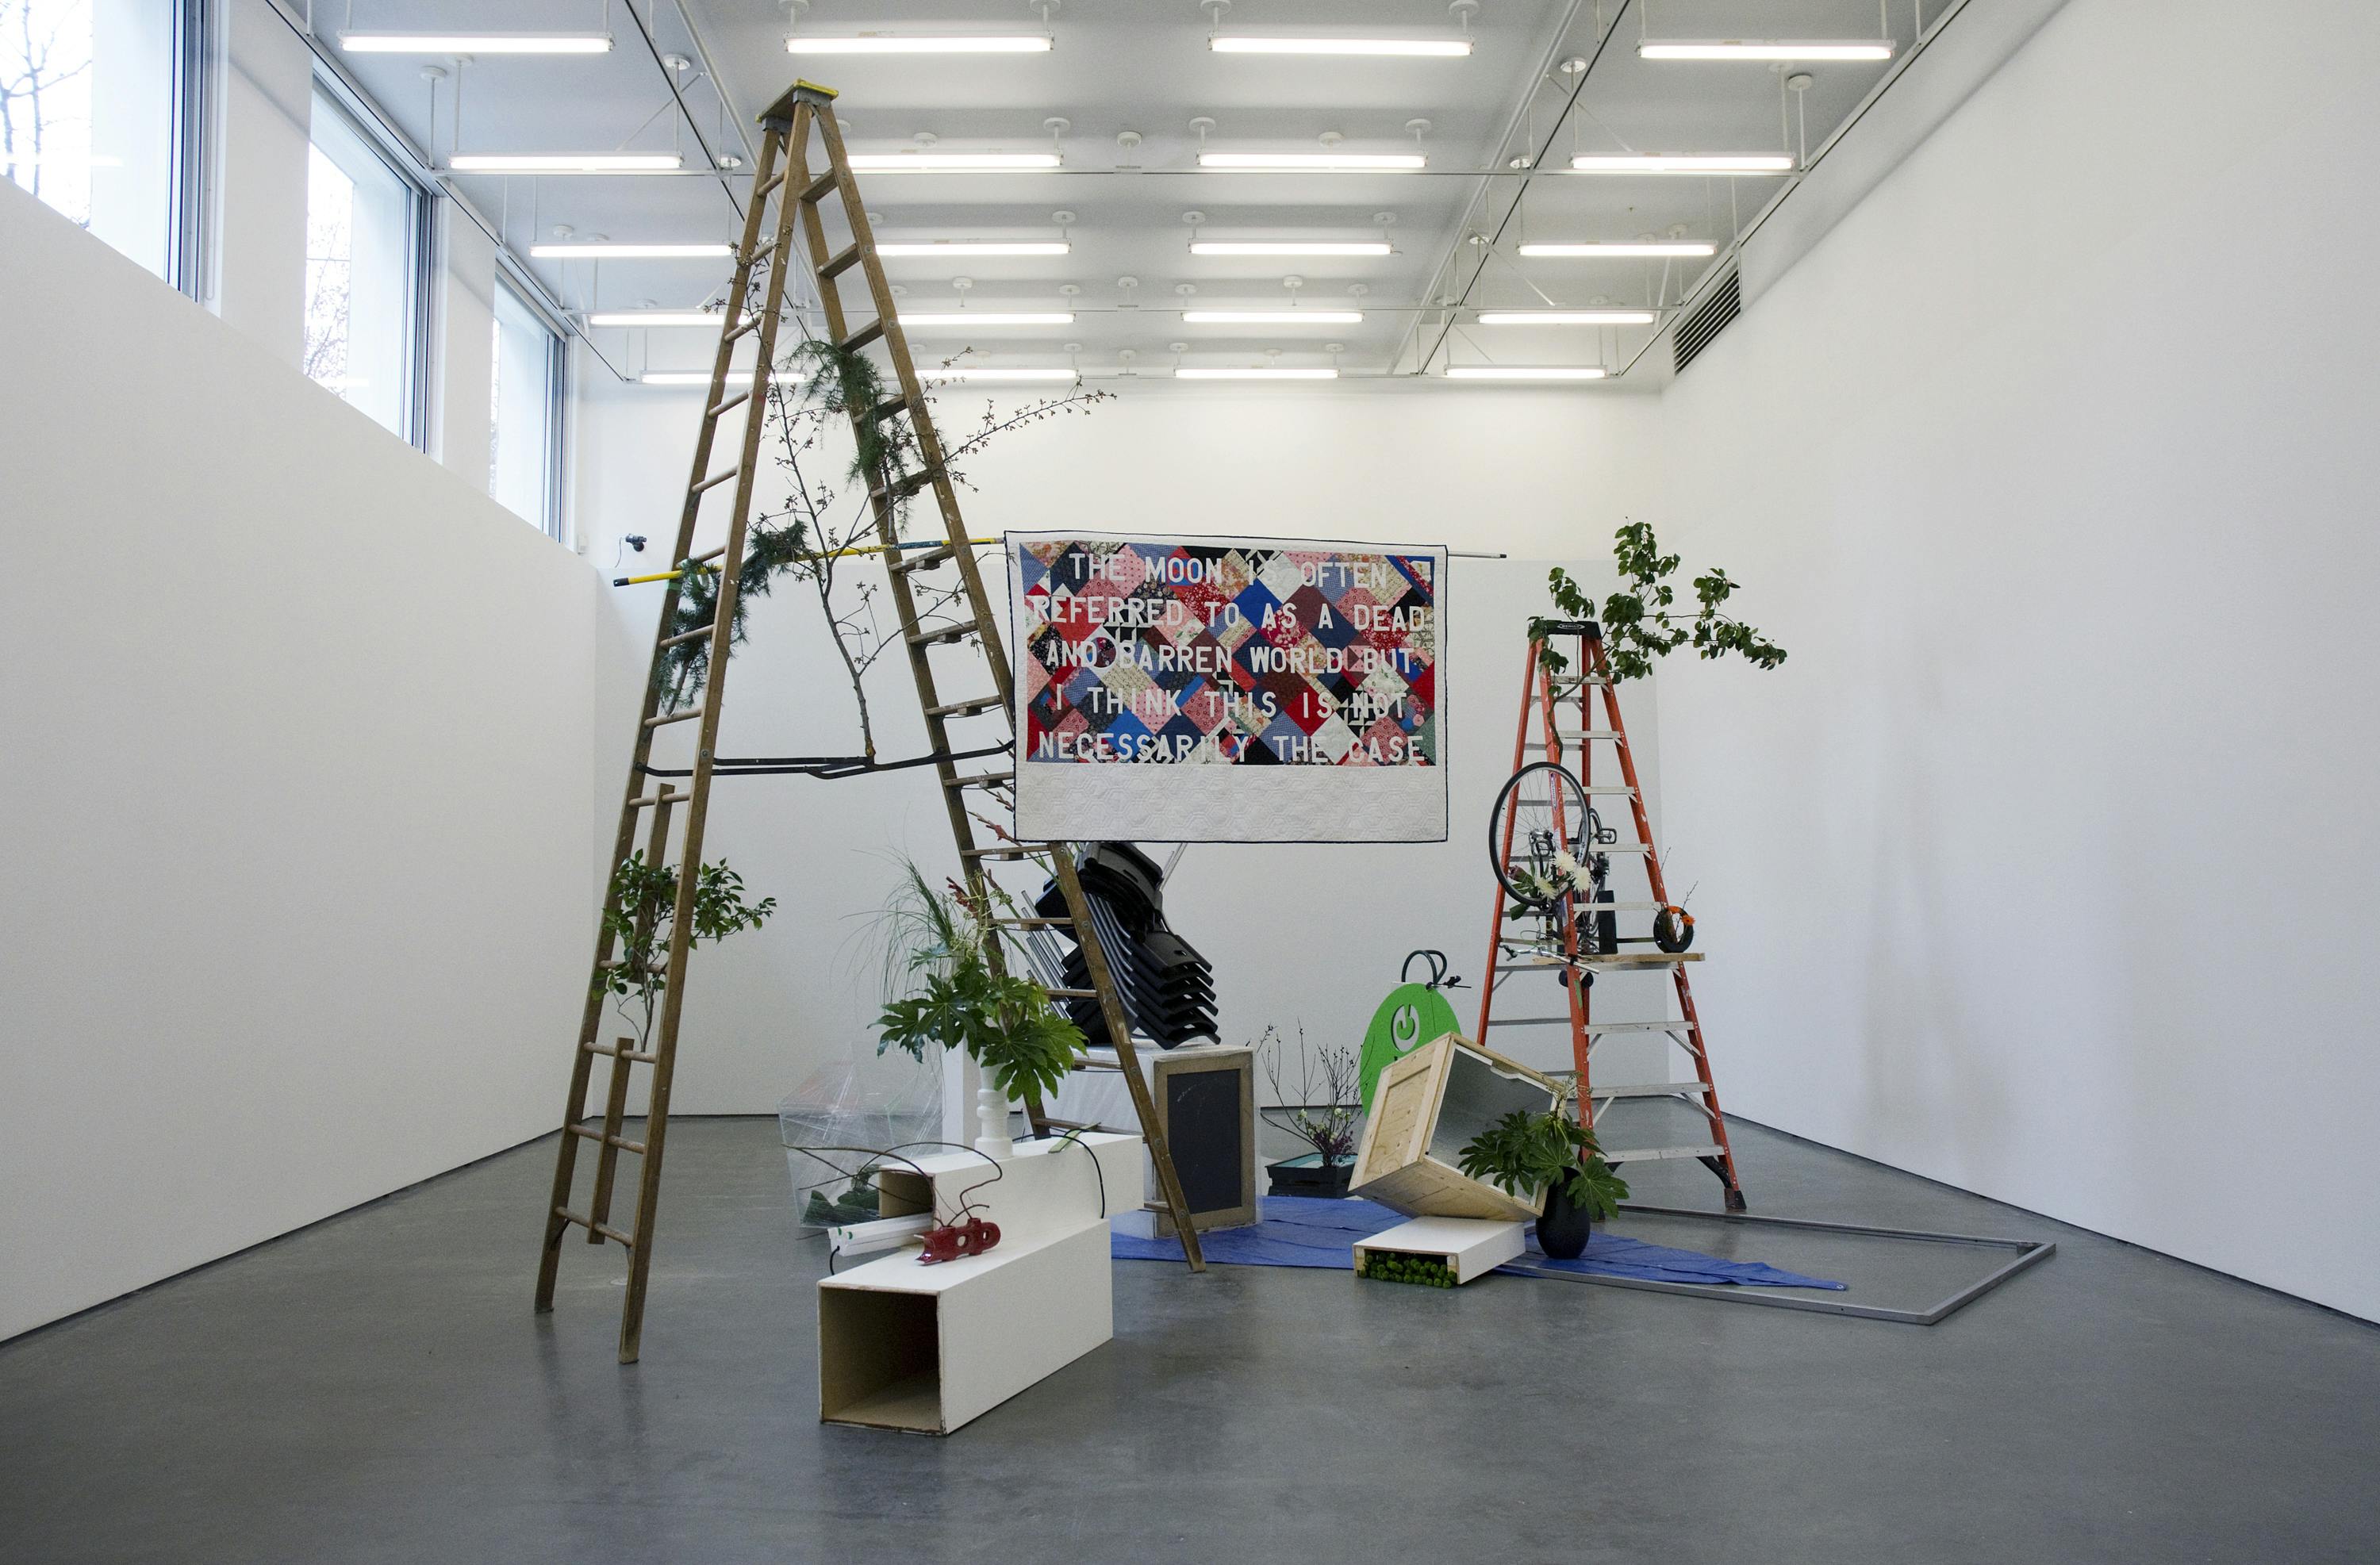 A sculptural installation occupies the center of a gallery space. The installation is made of various objects including ladders, plants, chairs, plinths, a quilted banner and boxes, among others.